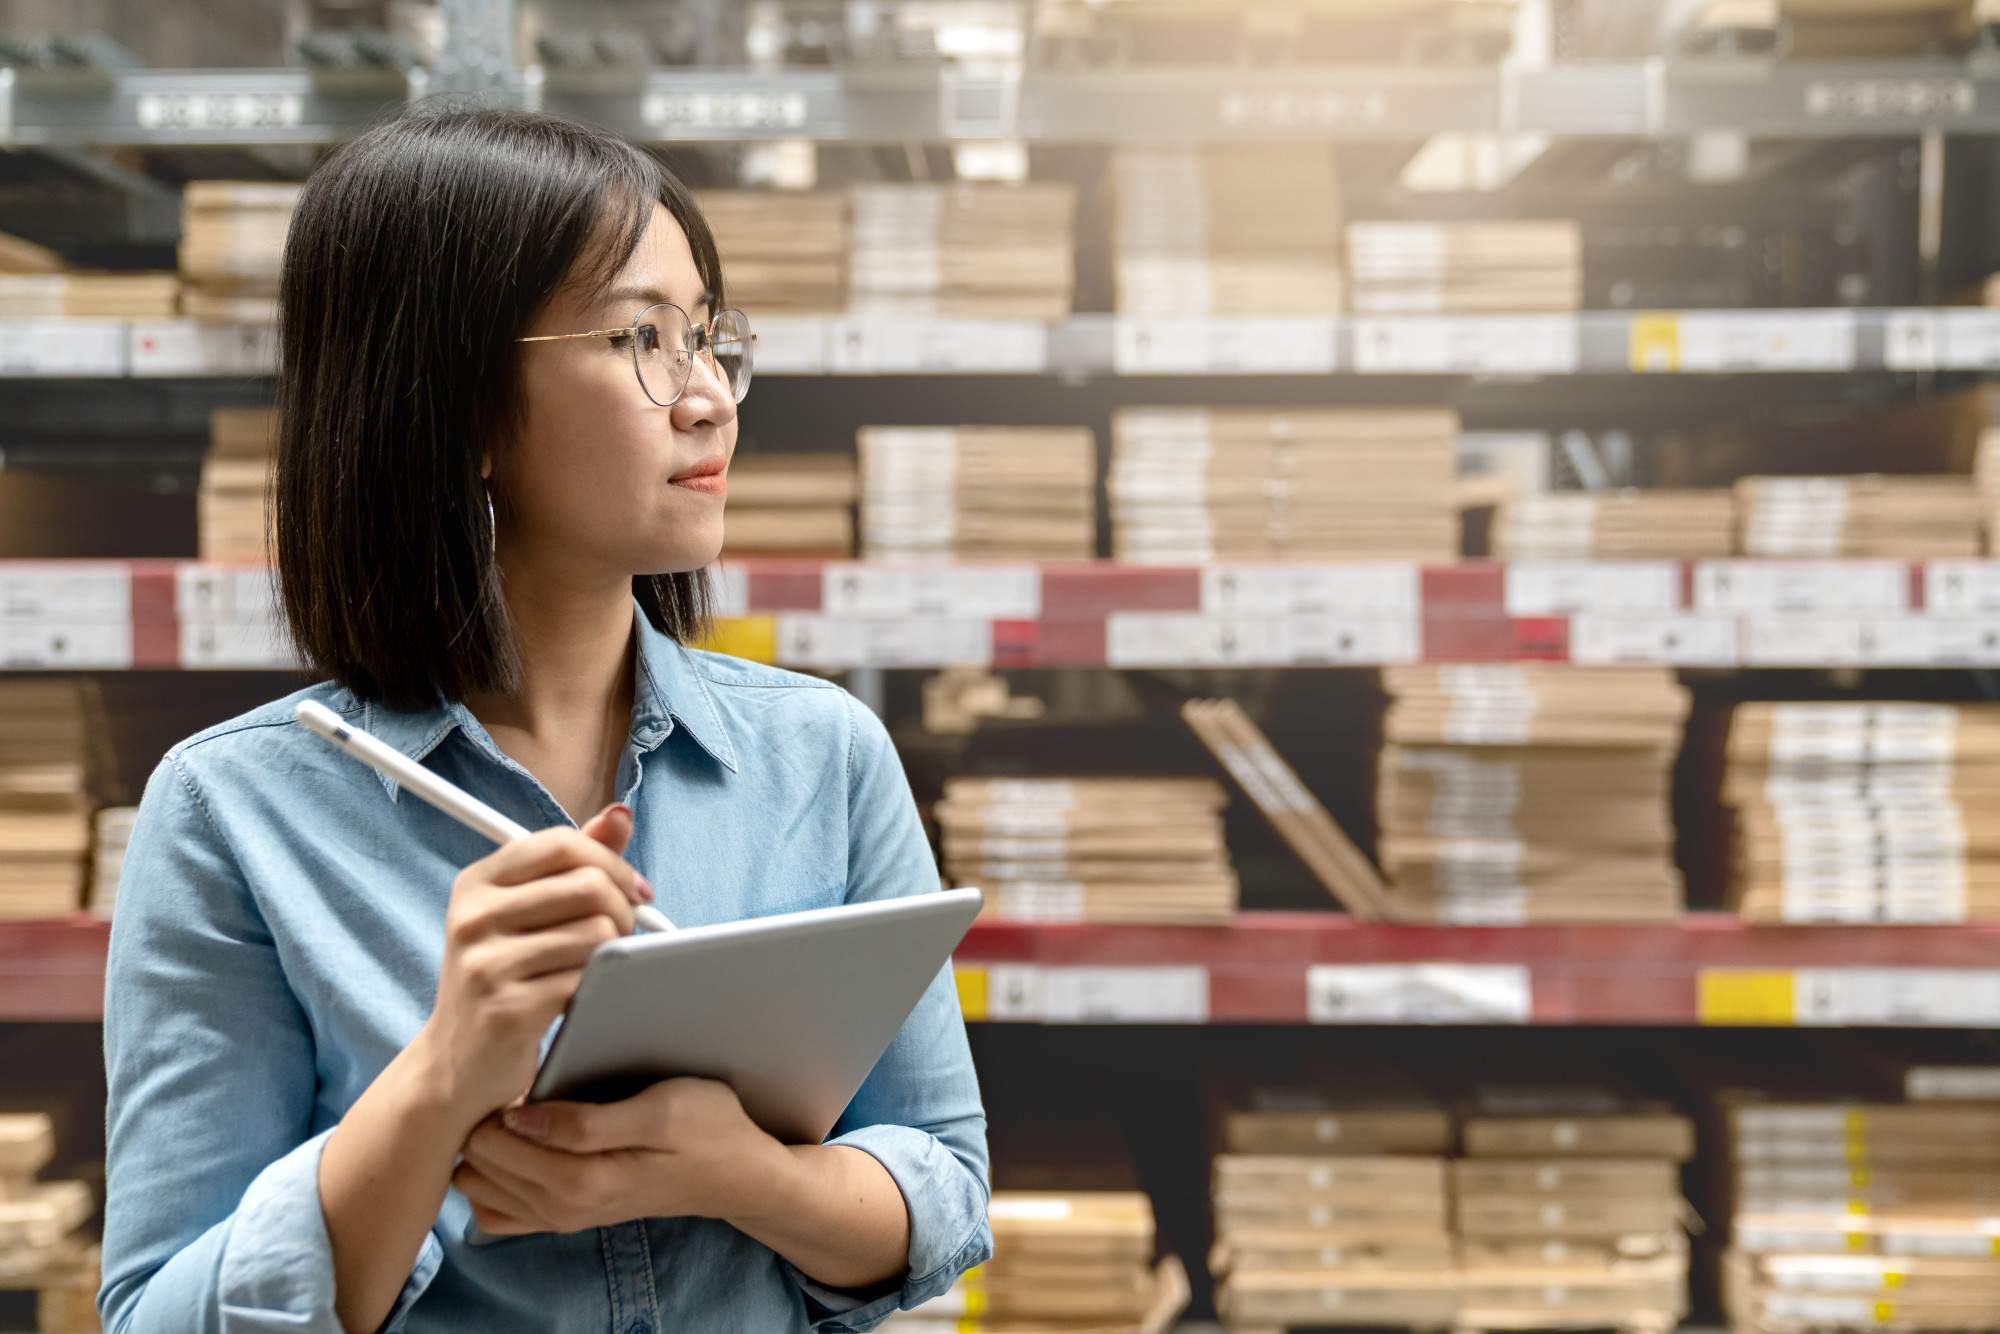 How to Select the Best Warehouse Management System for Your Business